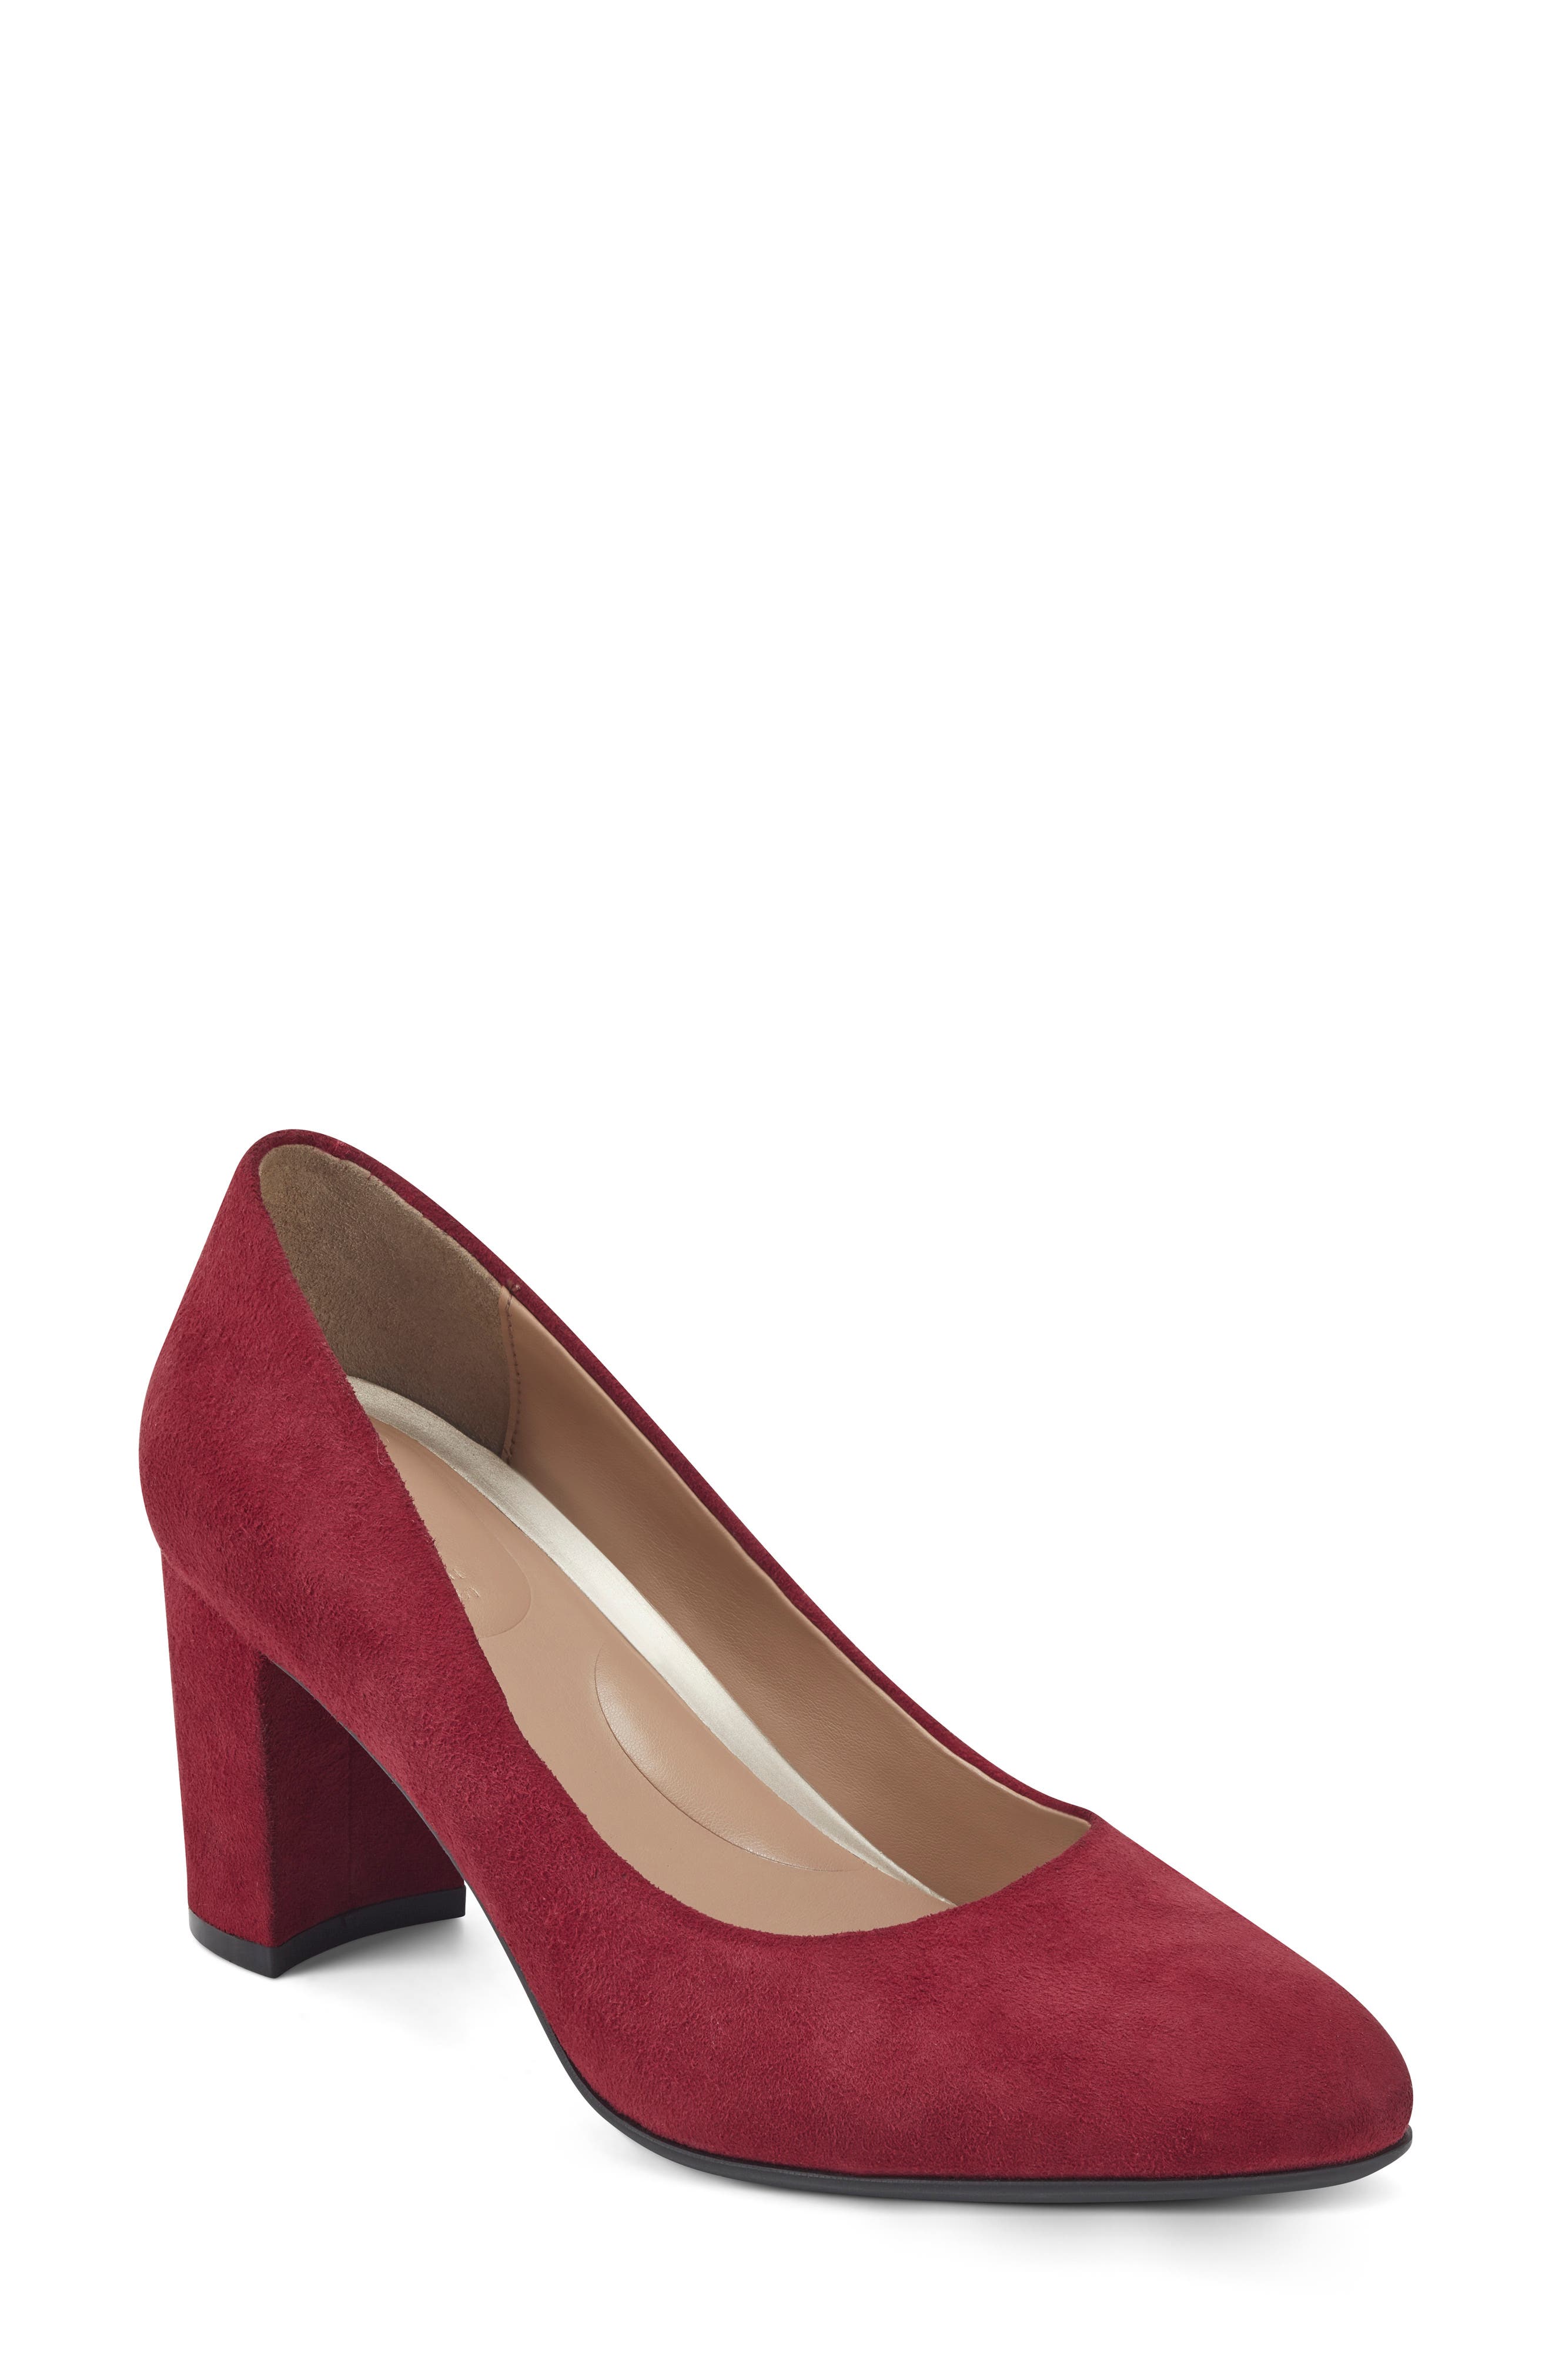 red aerosoles shoes